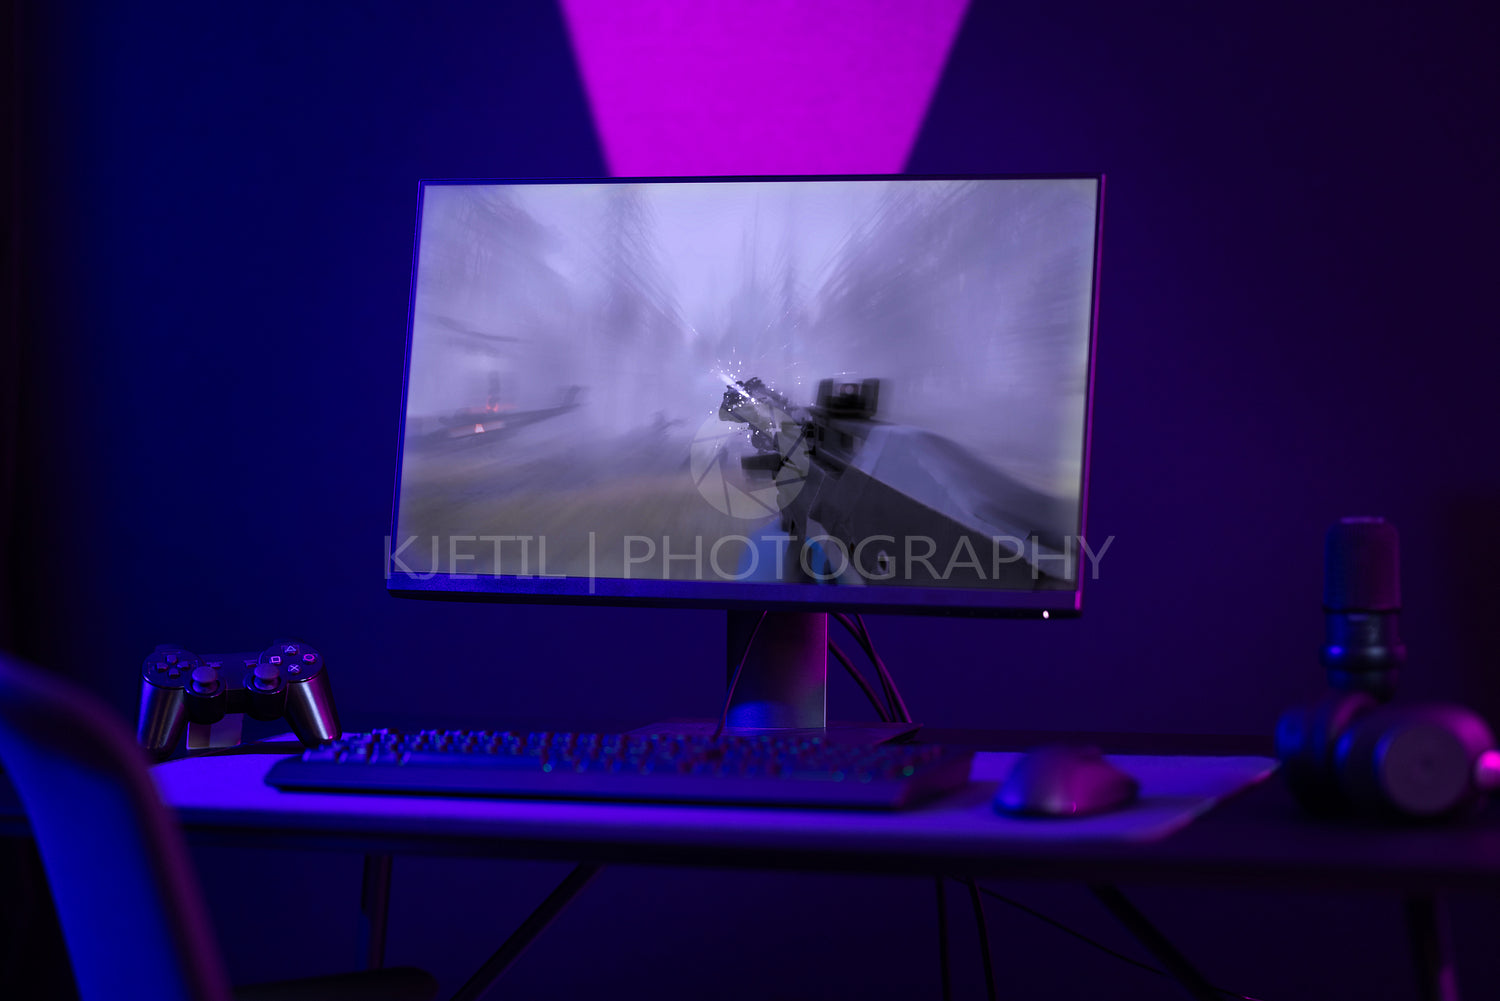 Colorful e-sport gaming and streaming studio with first-person shooter online video game on computer monitor